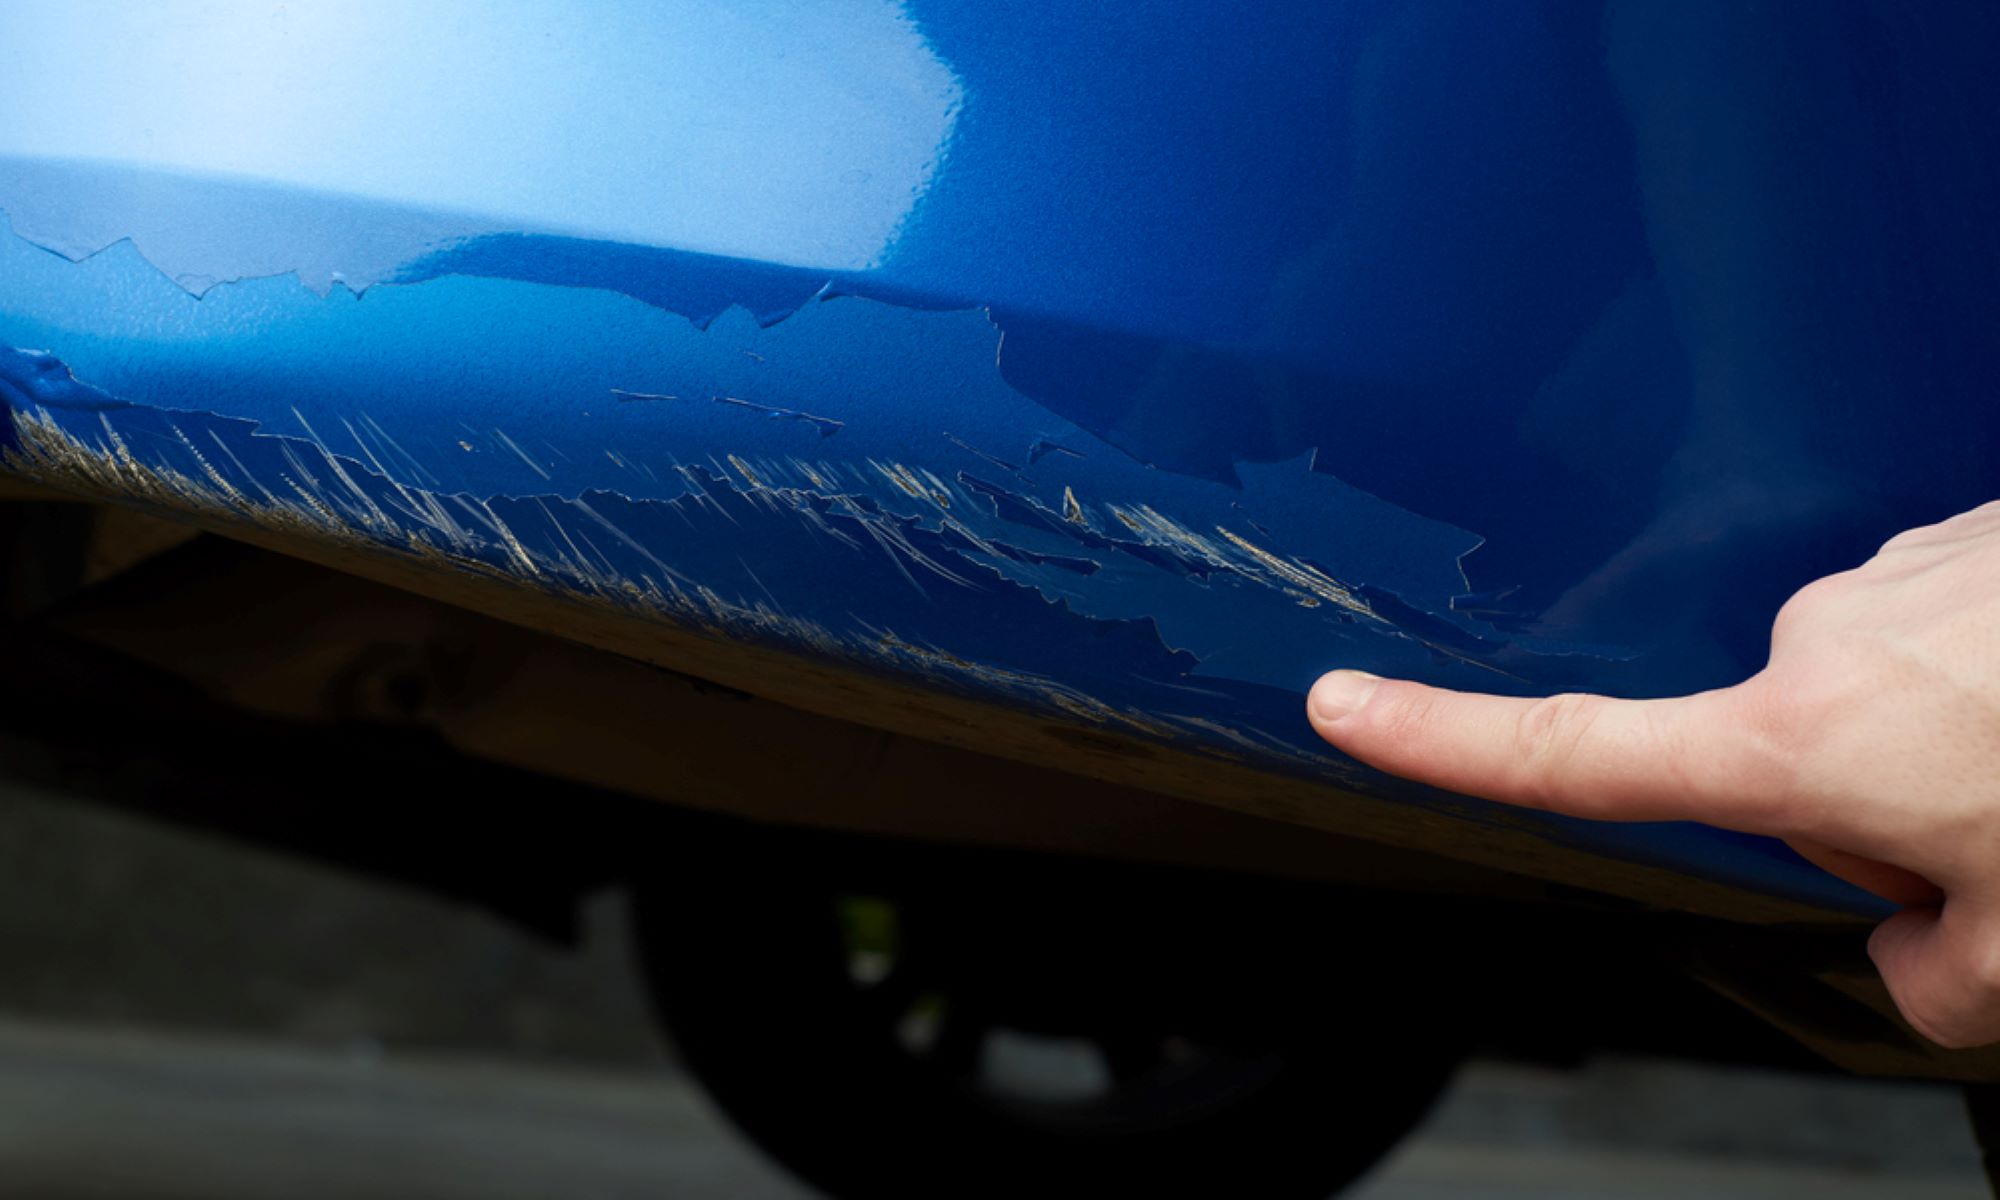 How To Remove Scratches From Your Car Bumper | Endurance